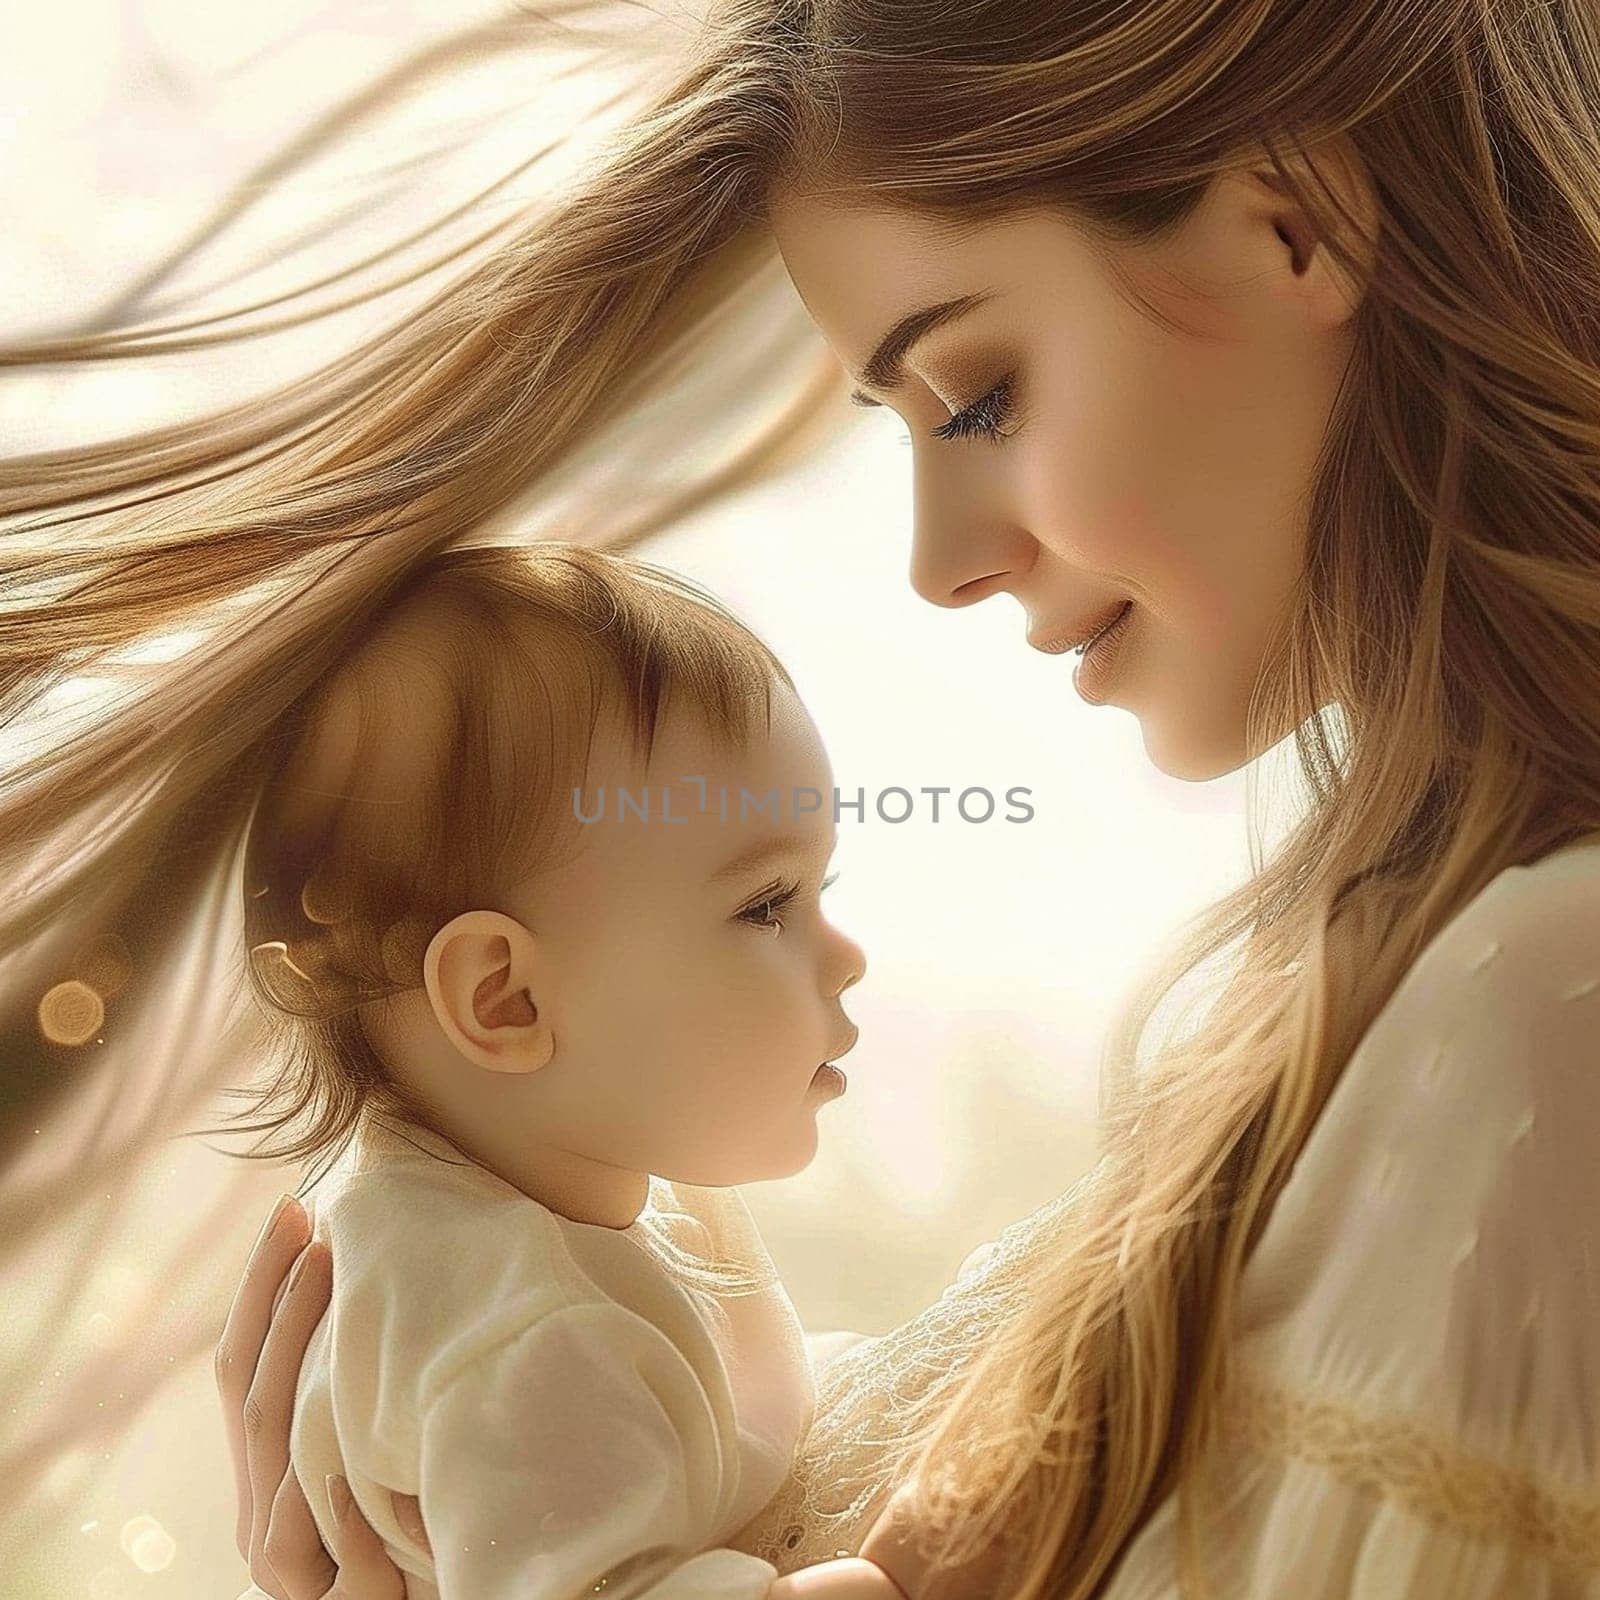 Mom gently hugs her baby. Cute family photo. High quality illustration